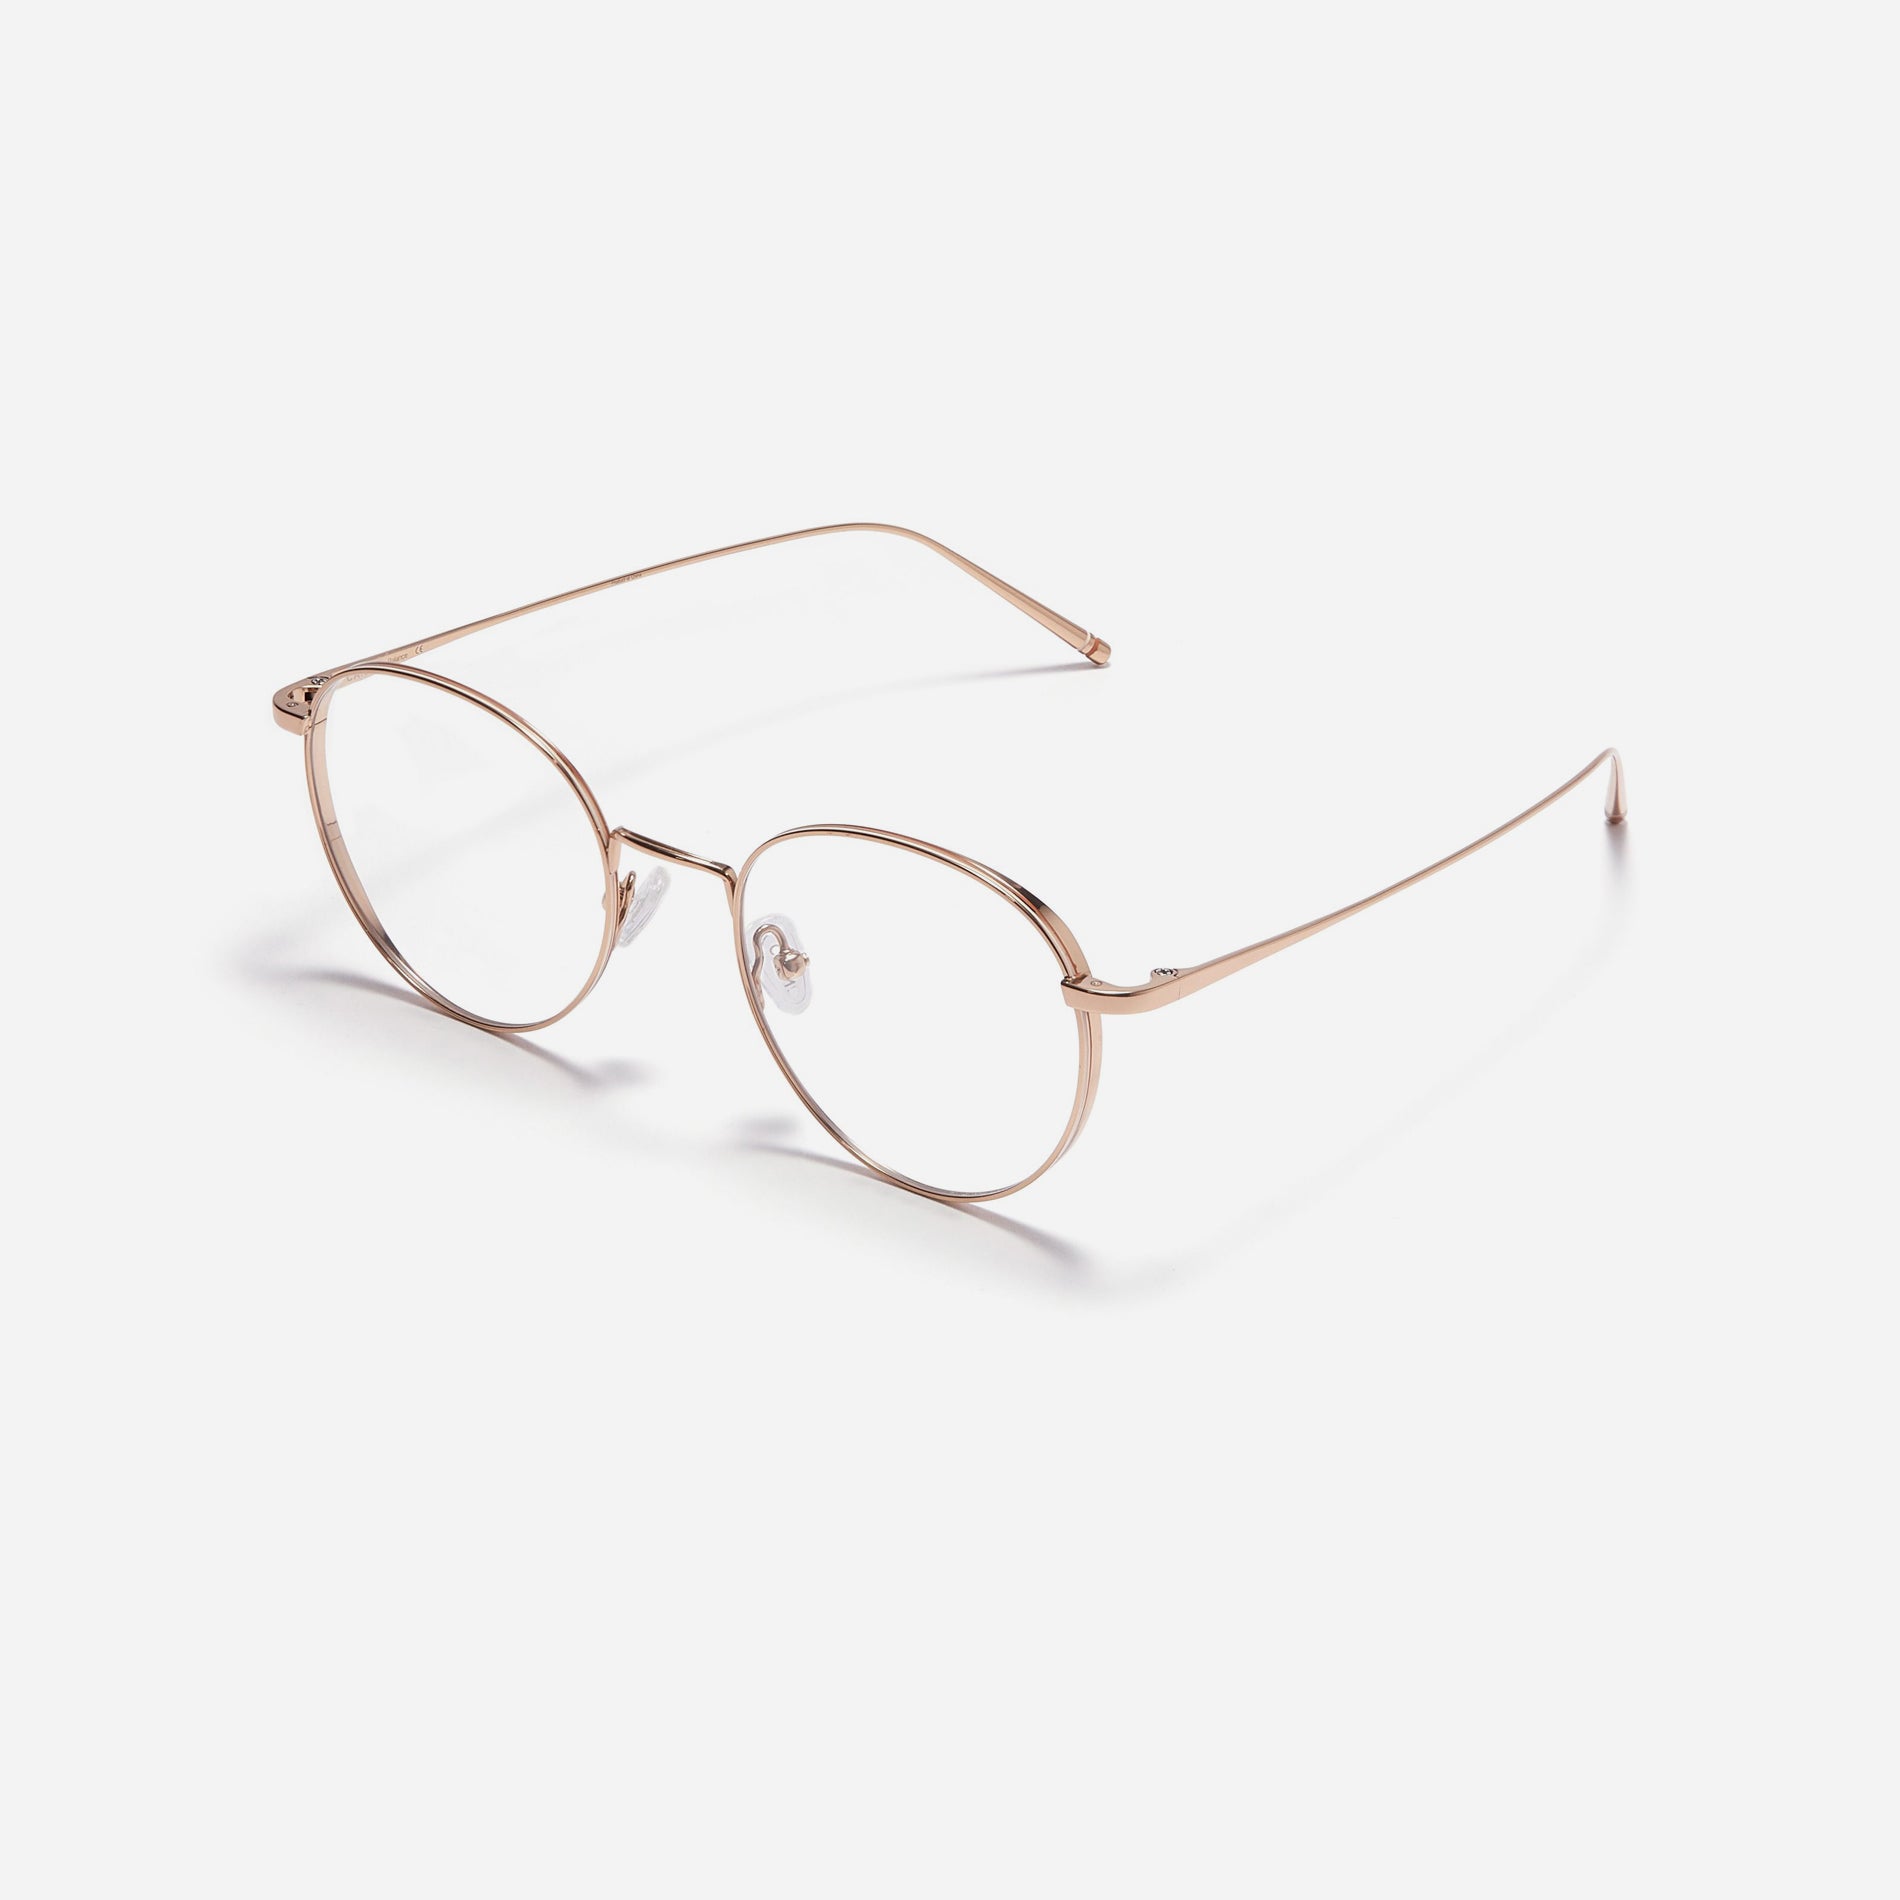 Round-shaped, full-metal eyeglasses with a dual-rim structure designed to accommodate thicker, high-prescription lenses. Both the frame and temples are made of pure titanium, ensuring a lightweight and comfortable fit.